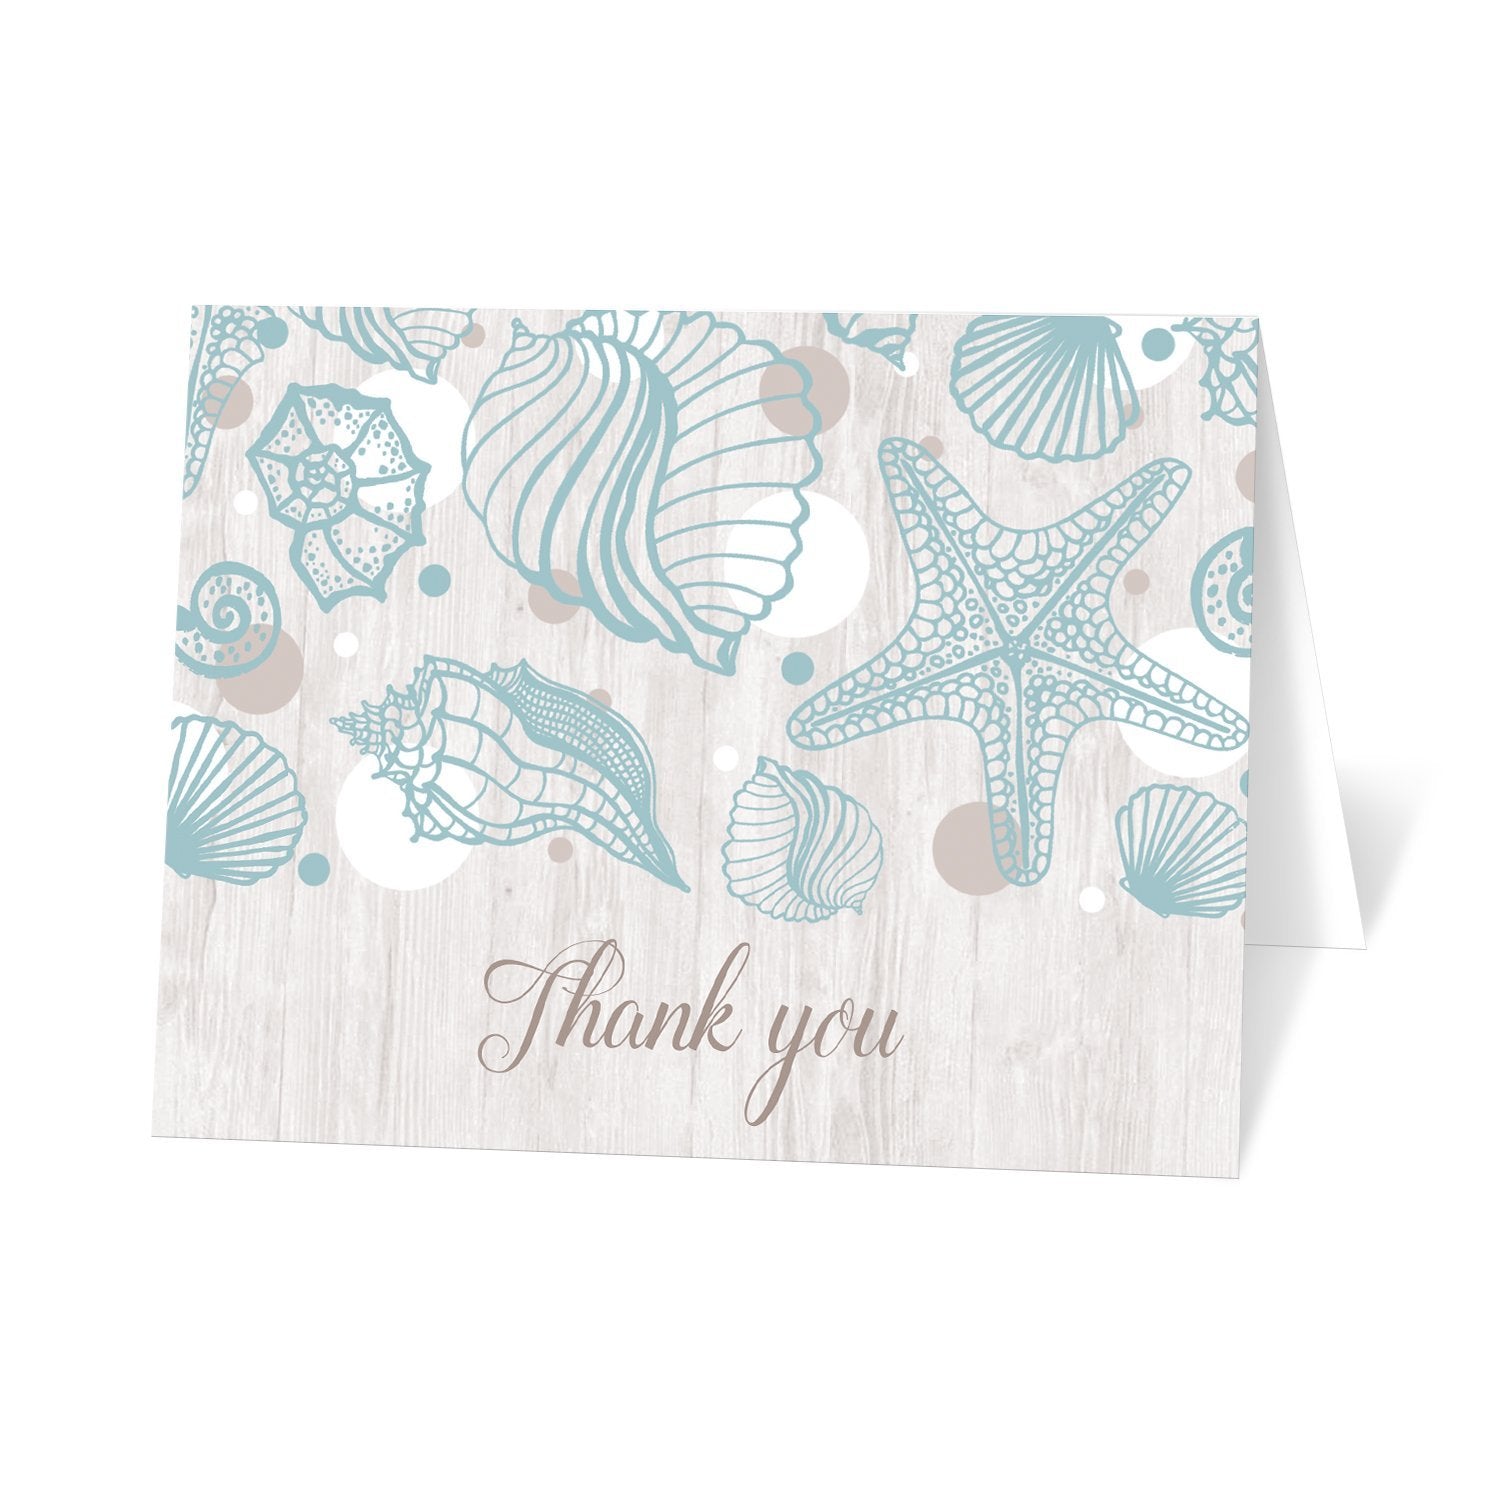 Seashell Whitewashed Wood Beach Thank You Cards at Artistically Invited